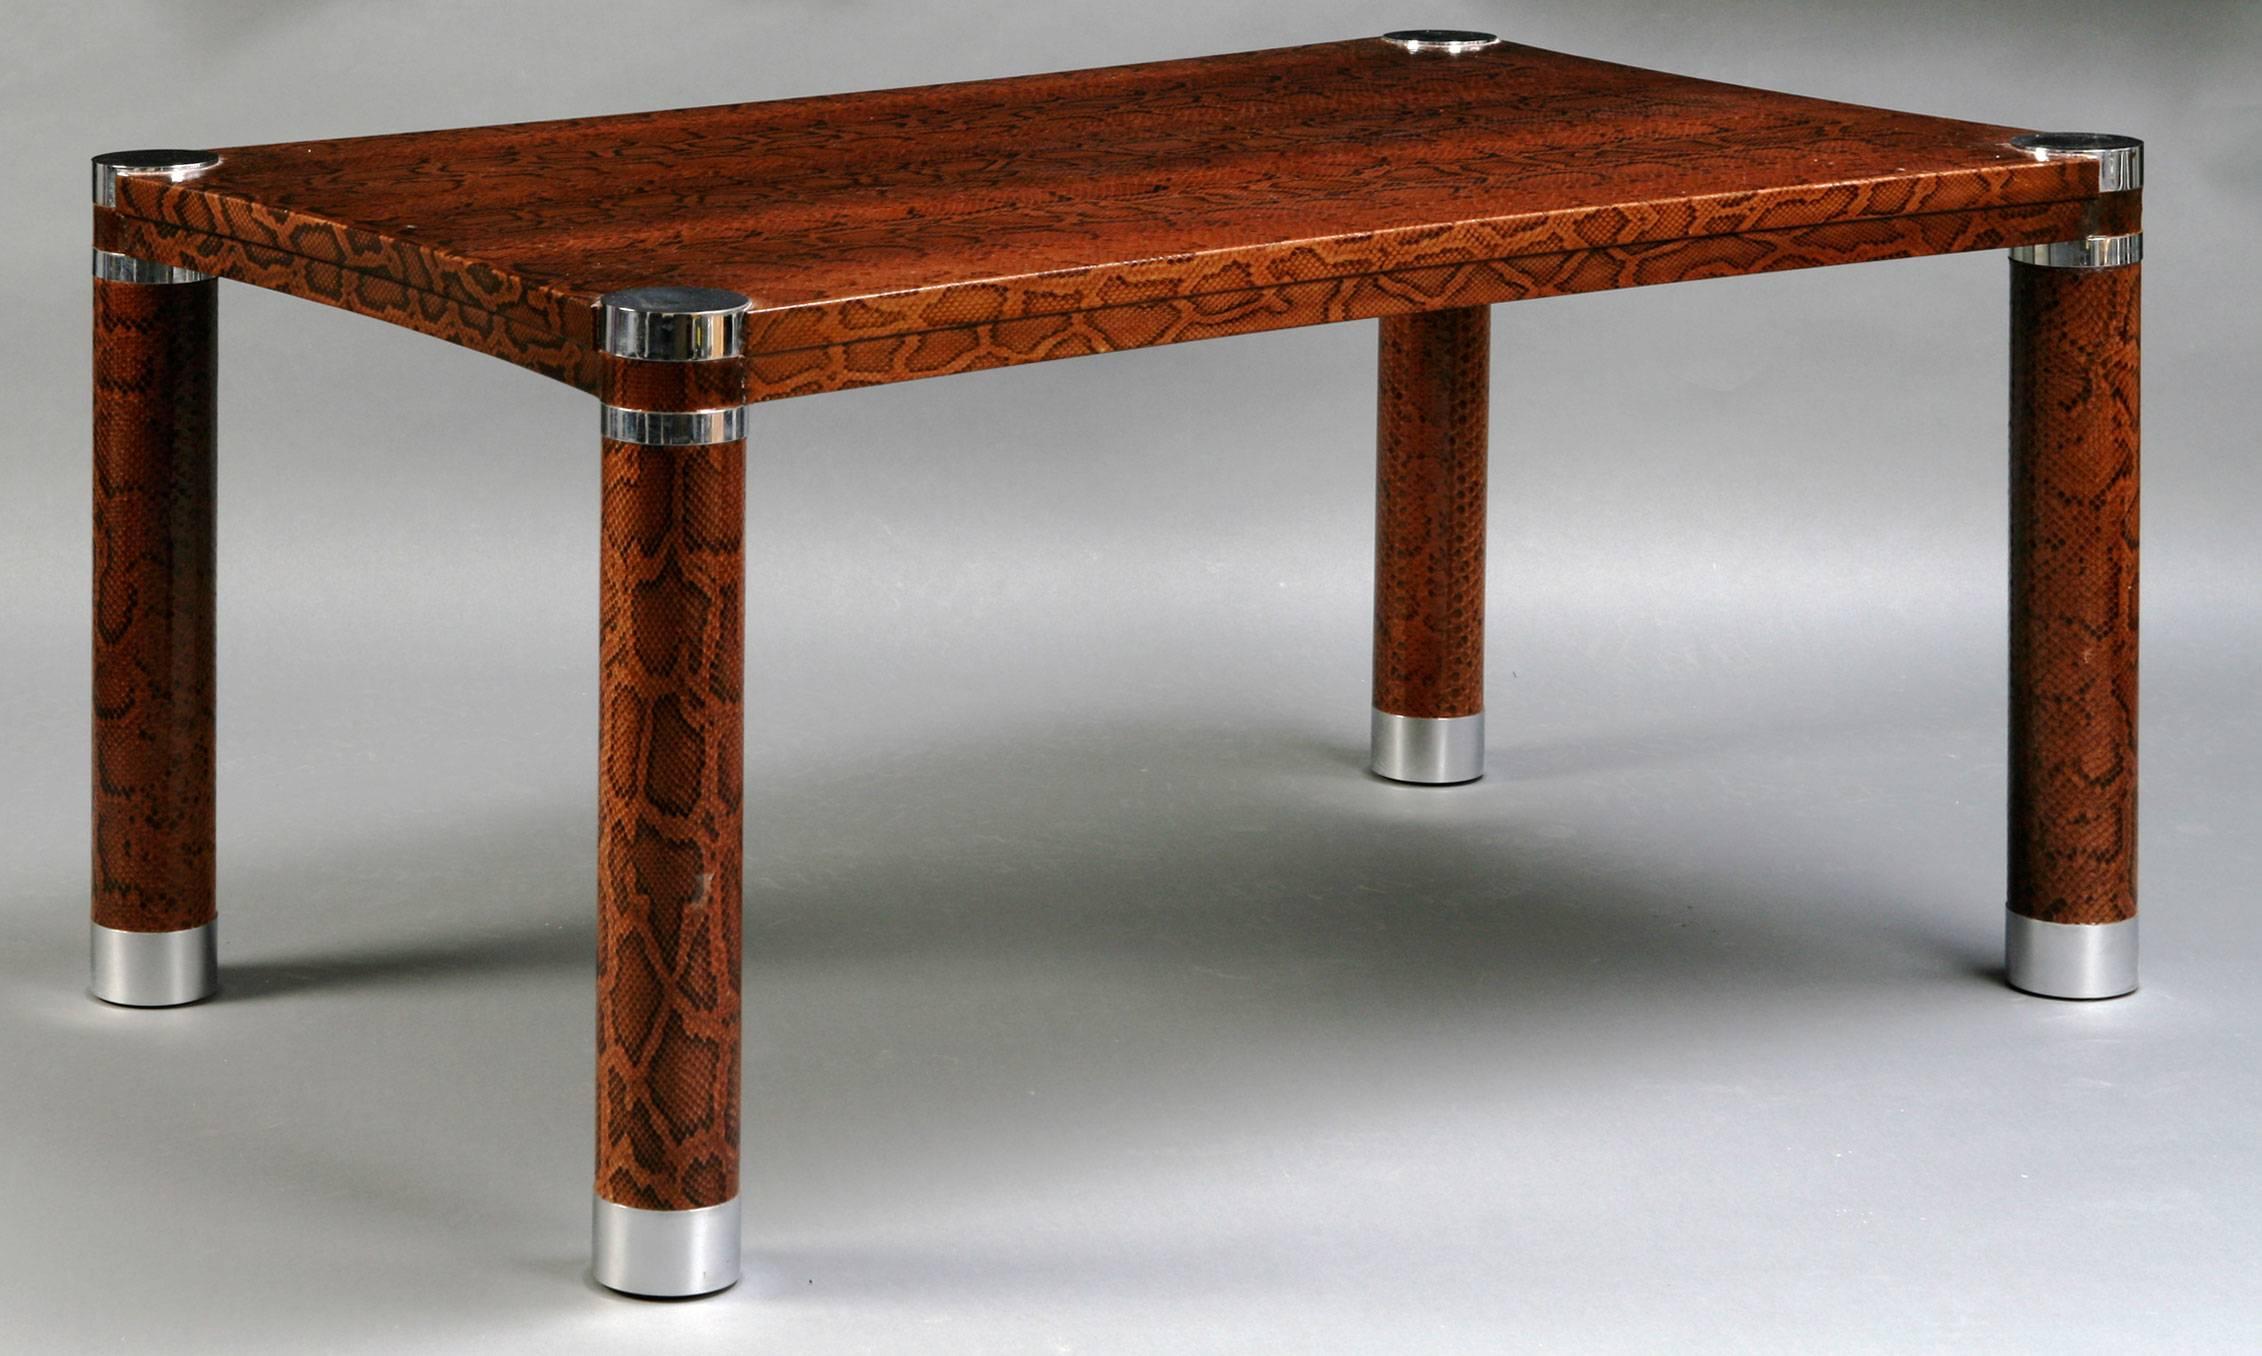 Rectangular coffee table covered in real brown python with polished steel banding on the legs.